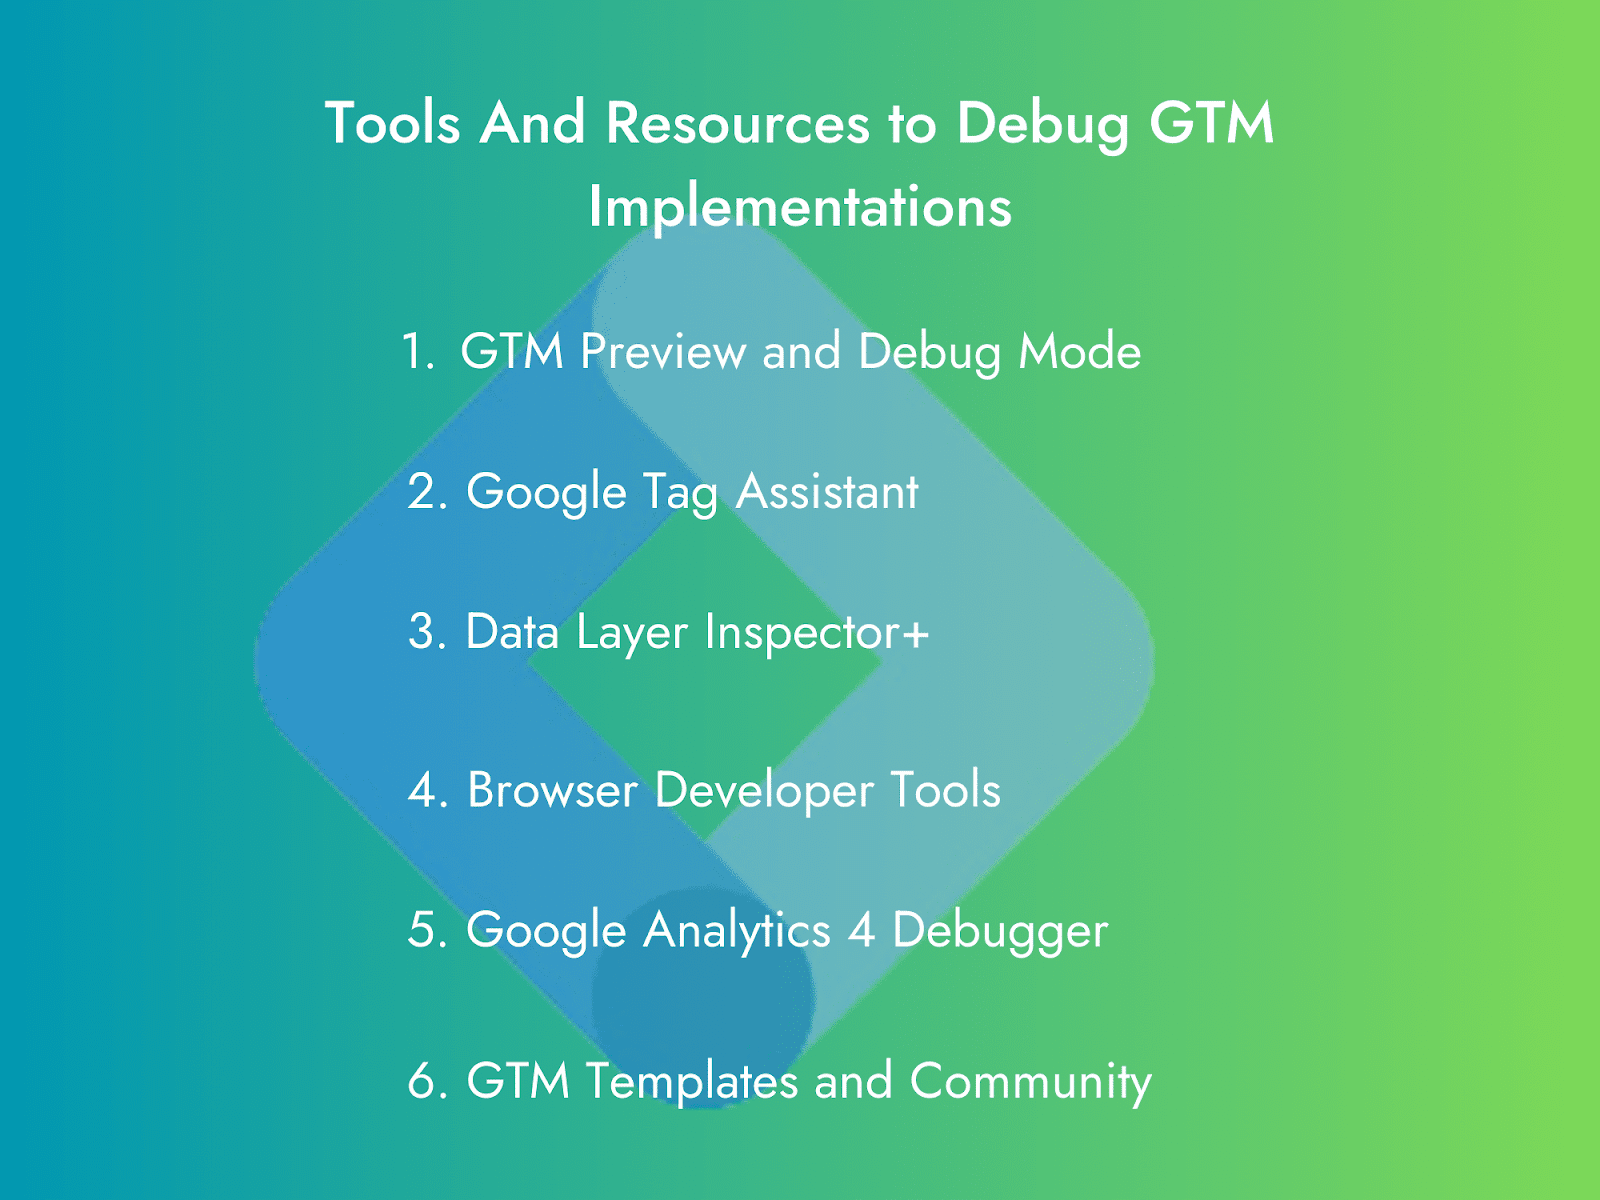 Tools and Resources to Debug GTM Implementation